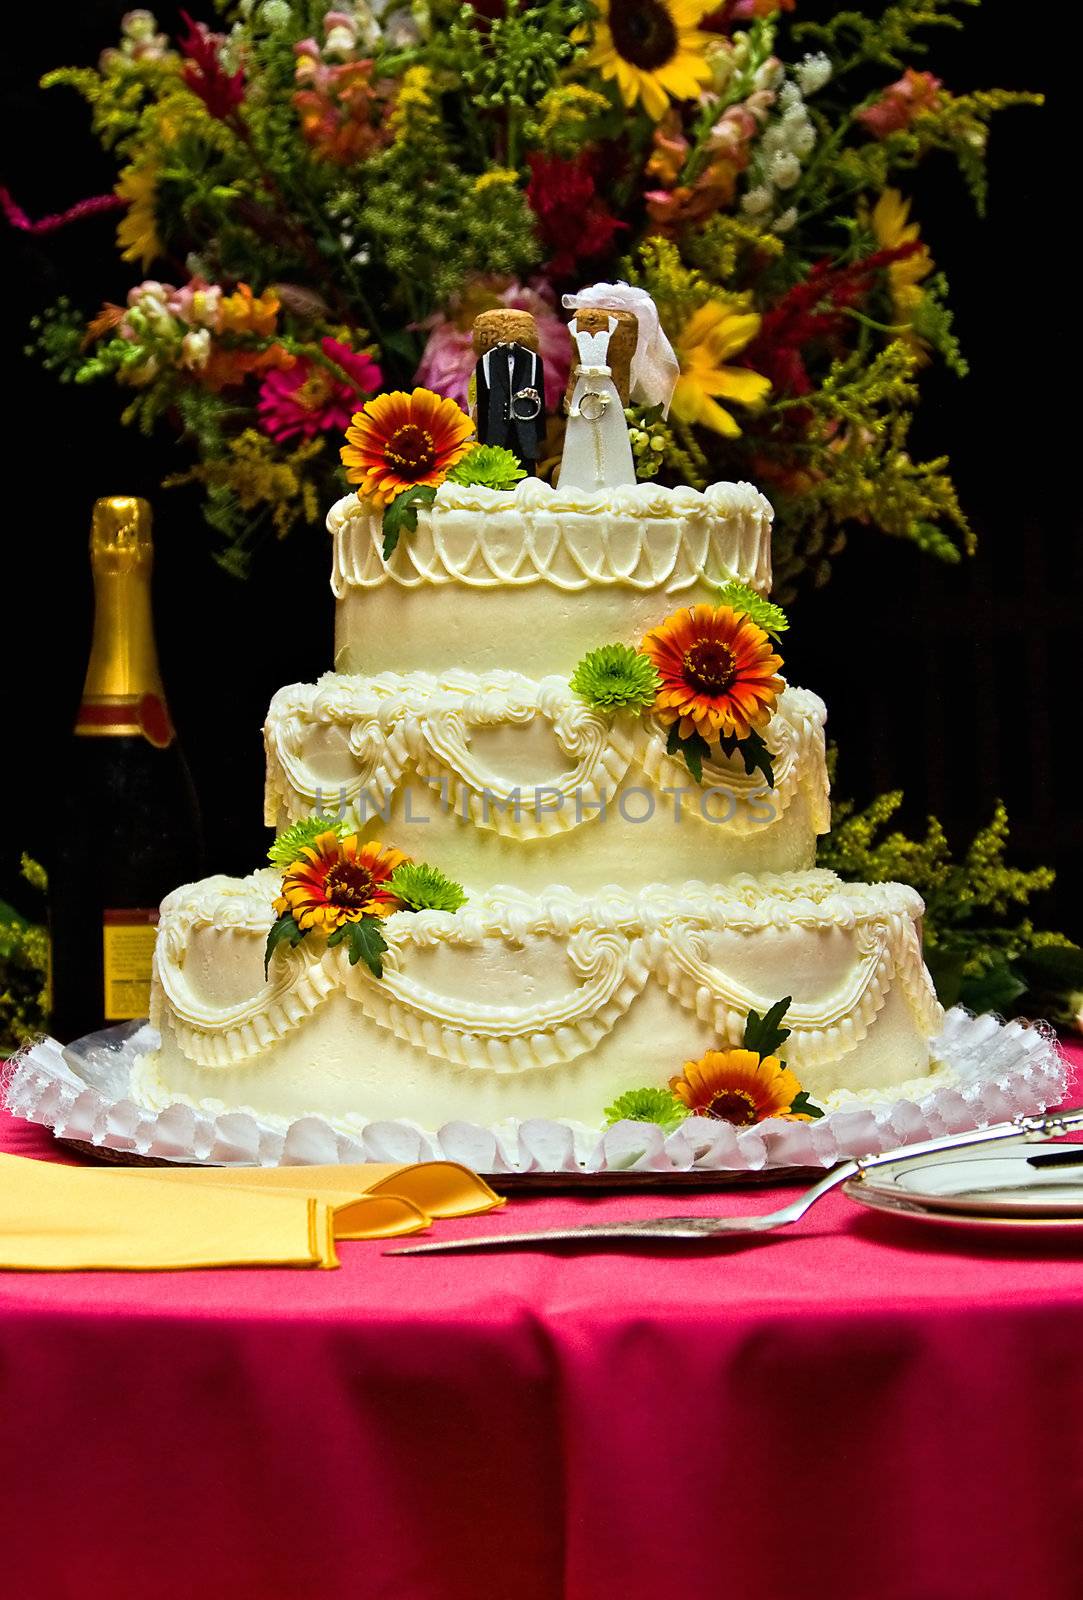 A white wedding cake accompanied with a variety of flowers. The cake is sitting on a table with a fuchsia table cloth.